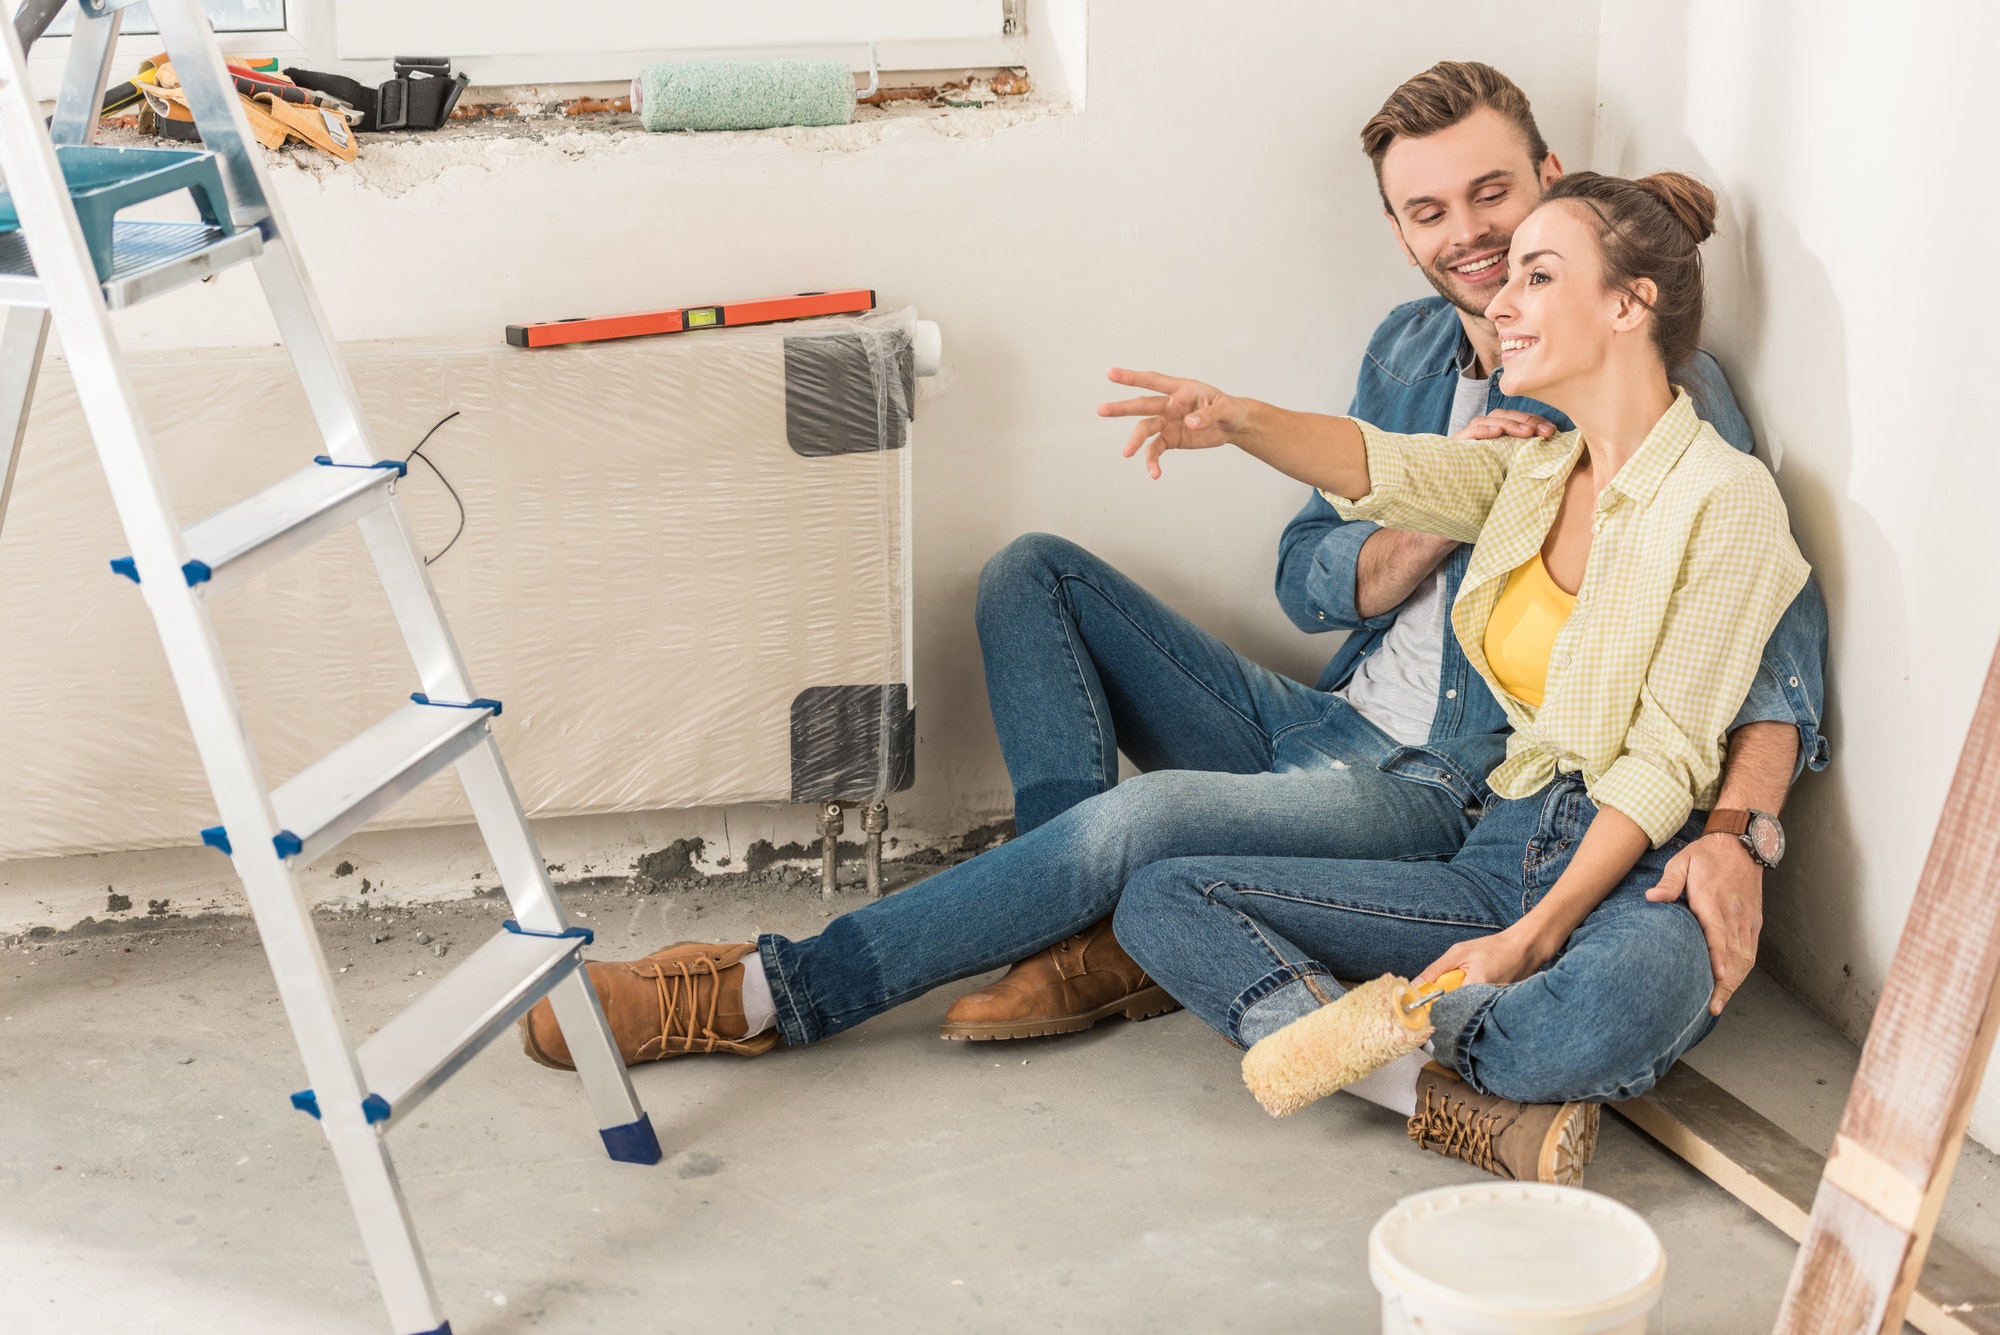 How to Find a Home Improvement Contractor